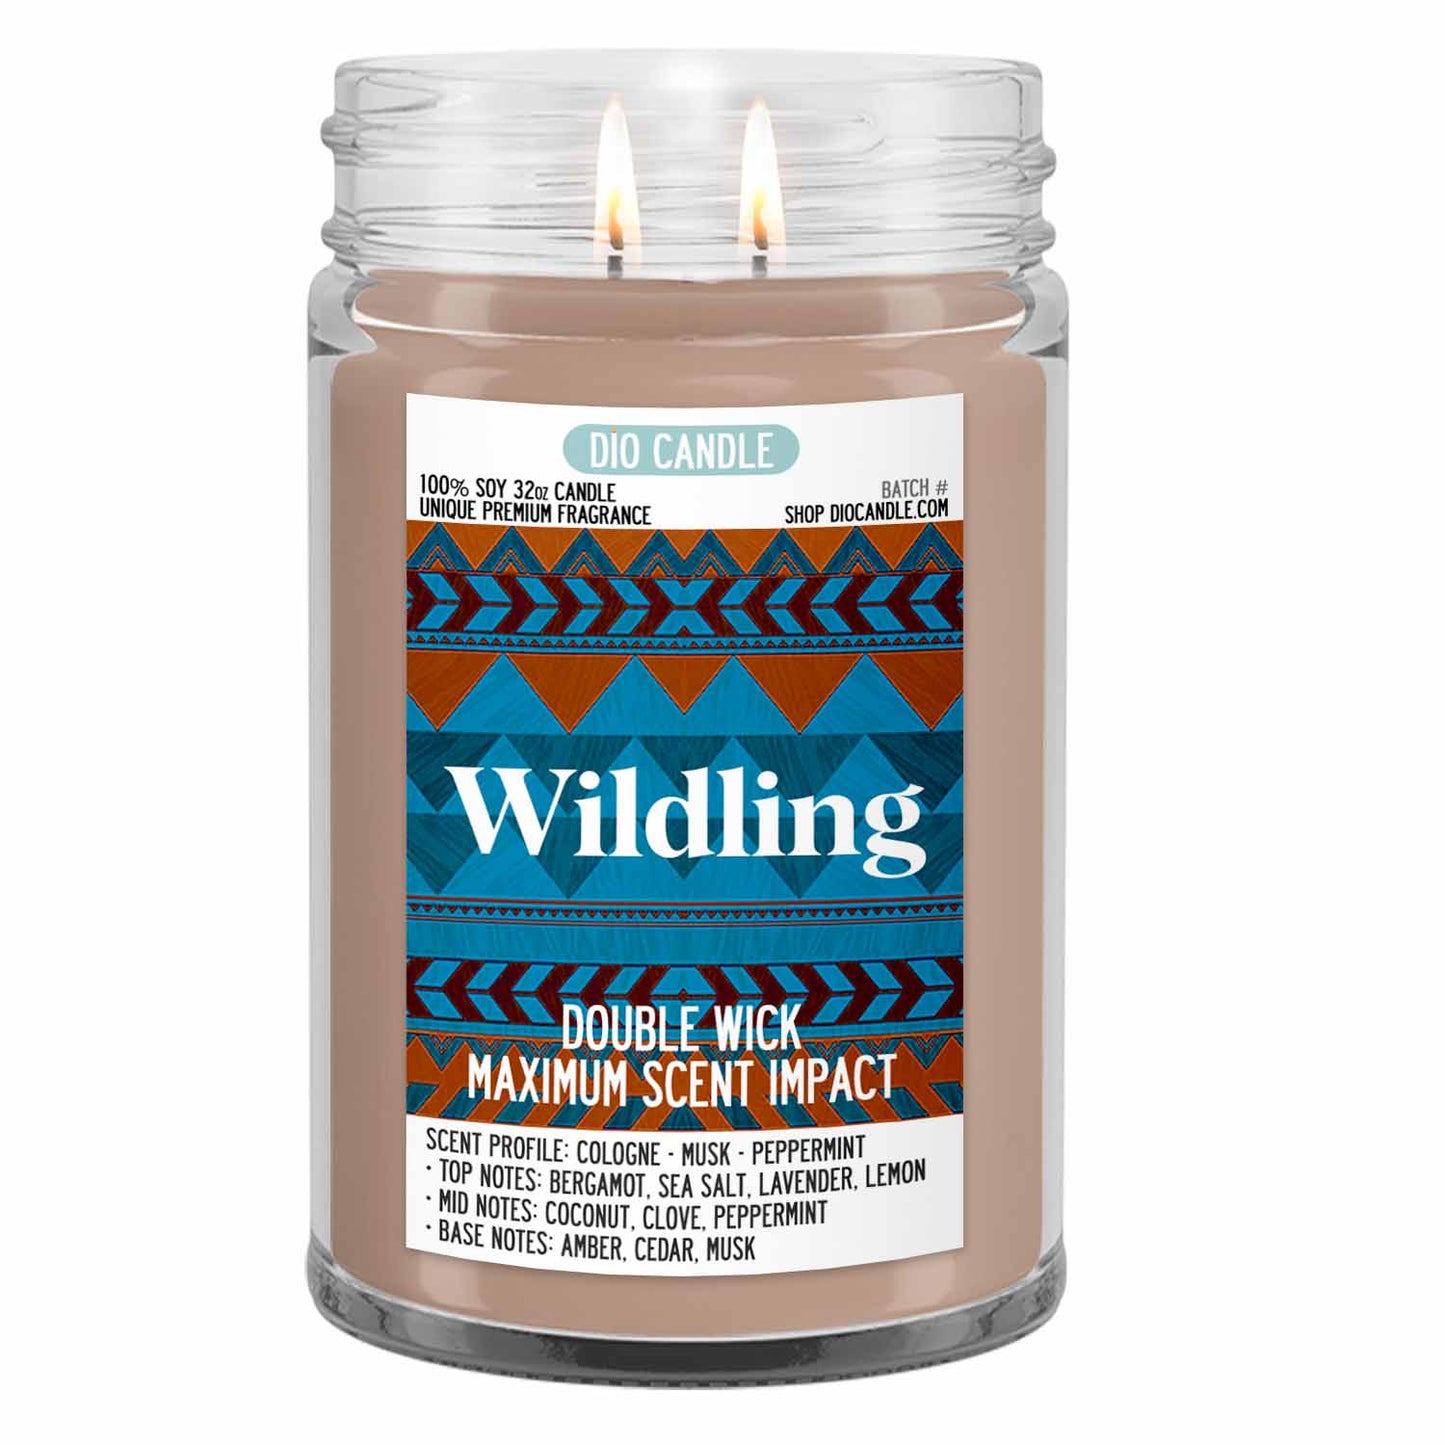 Wildling Candle